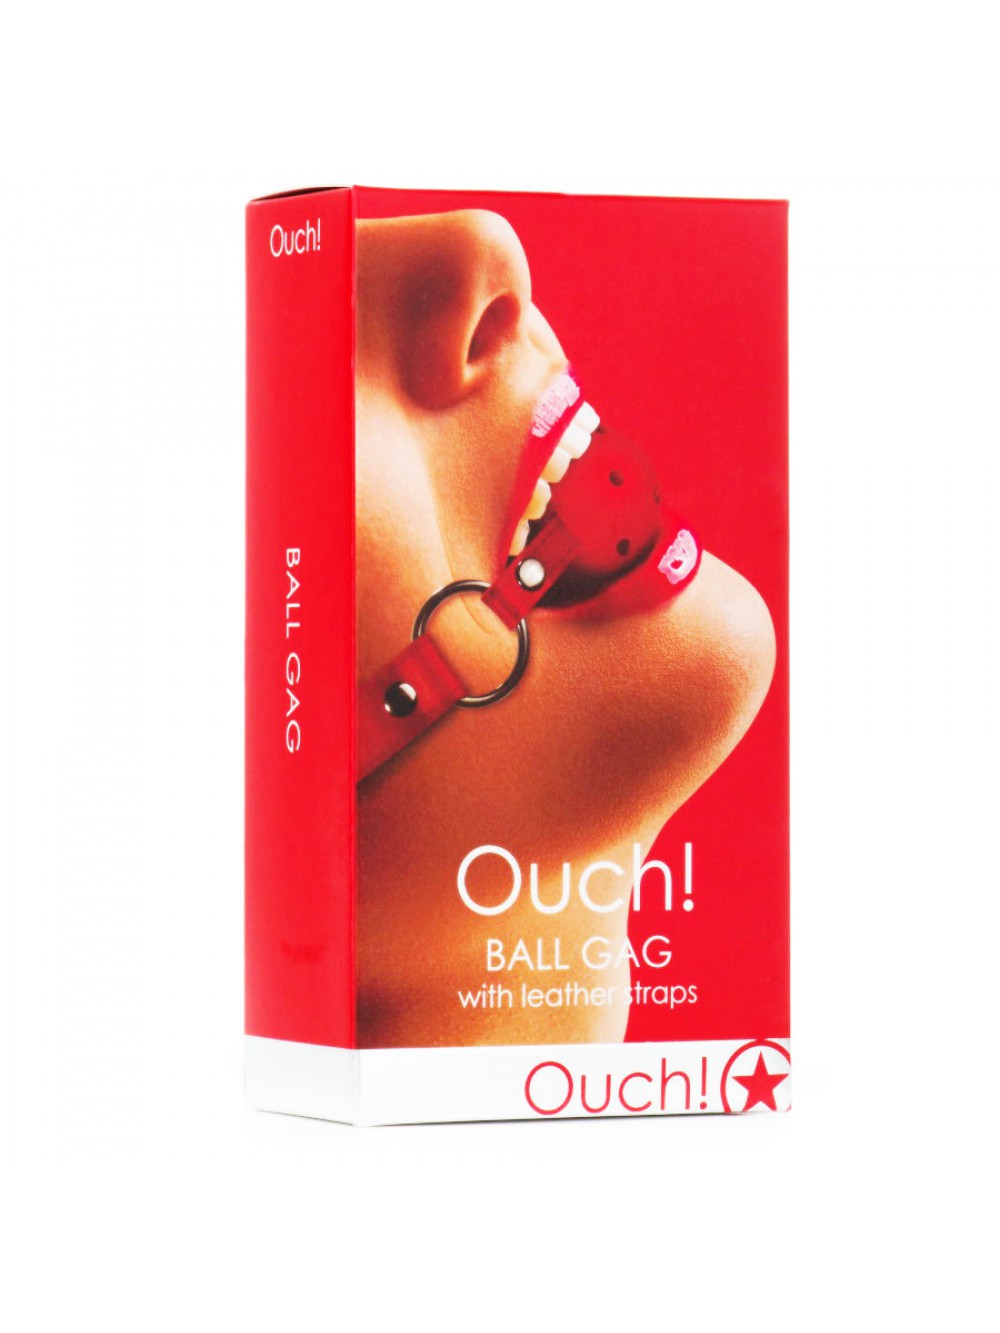 OUCH BALL GAG WITH LEATHER STRAPS RED